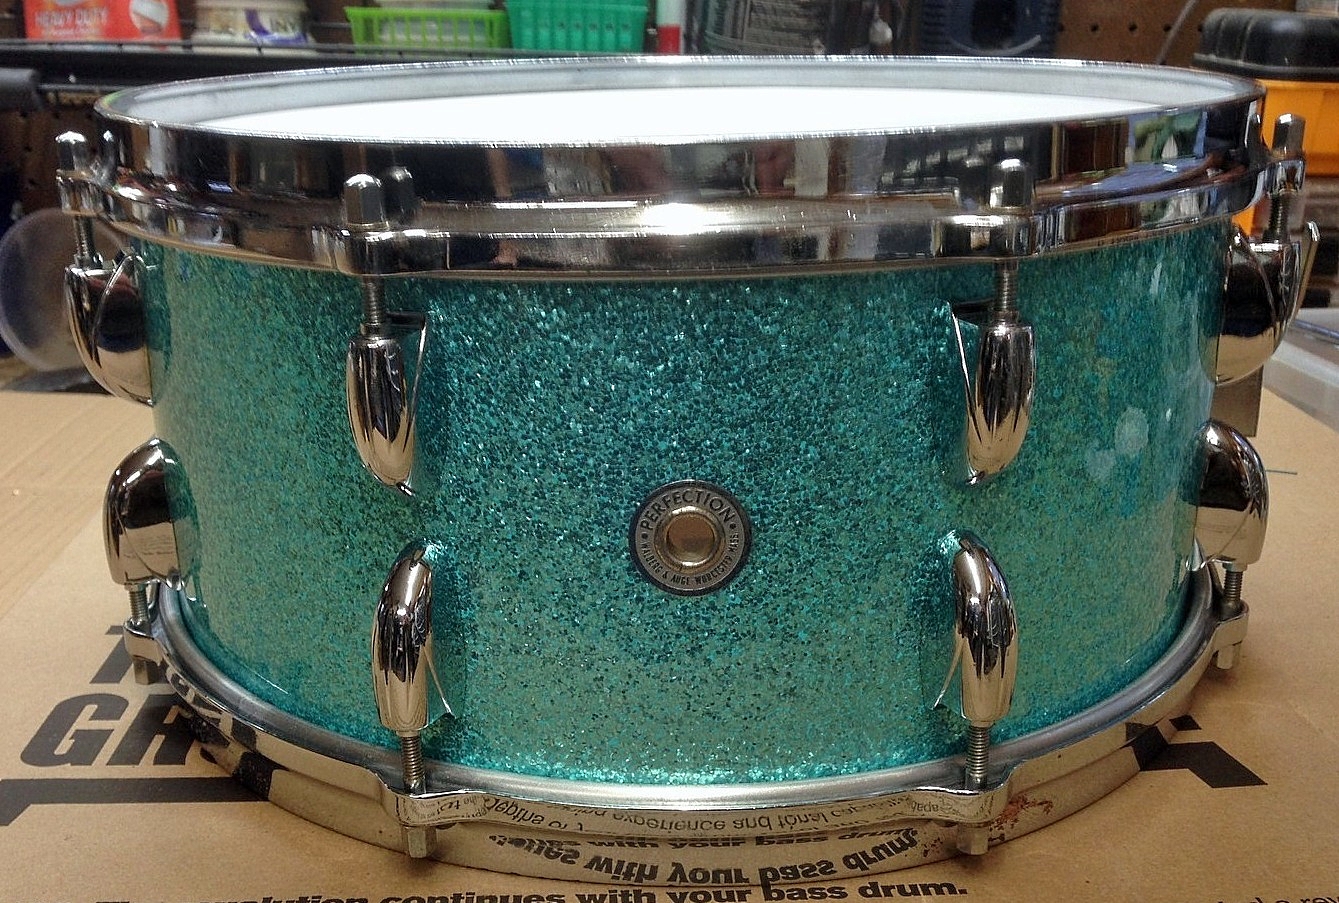 1962 Walberg and Auge Snare Drum Turquoise Sparkle.jpg